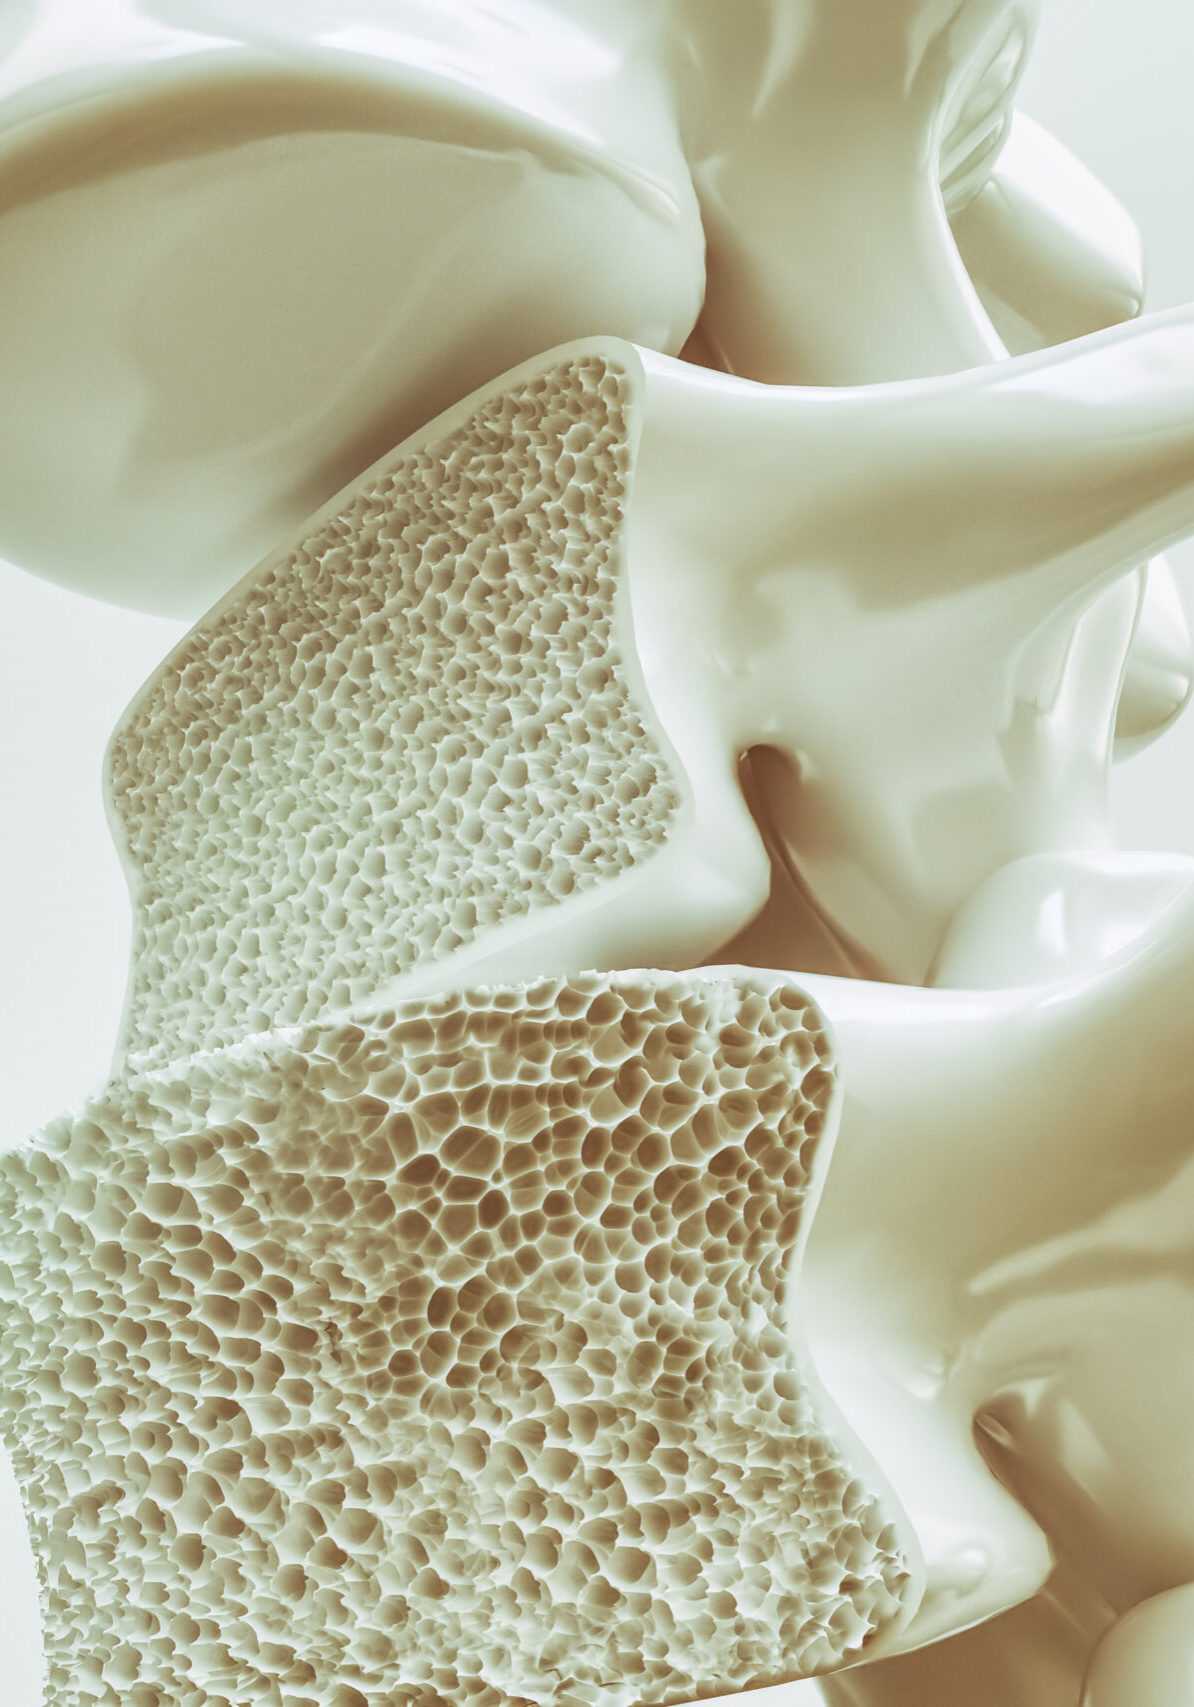 Osteoporosis on the spine -- 3d rendering